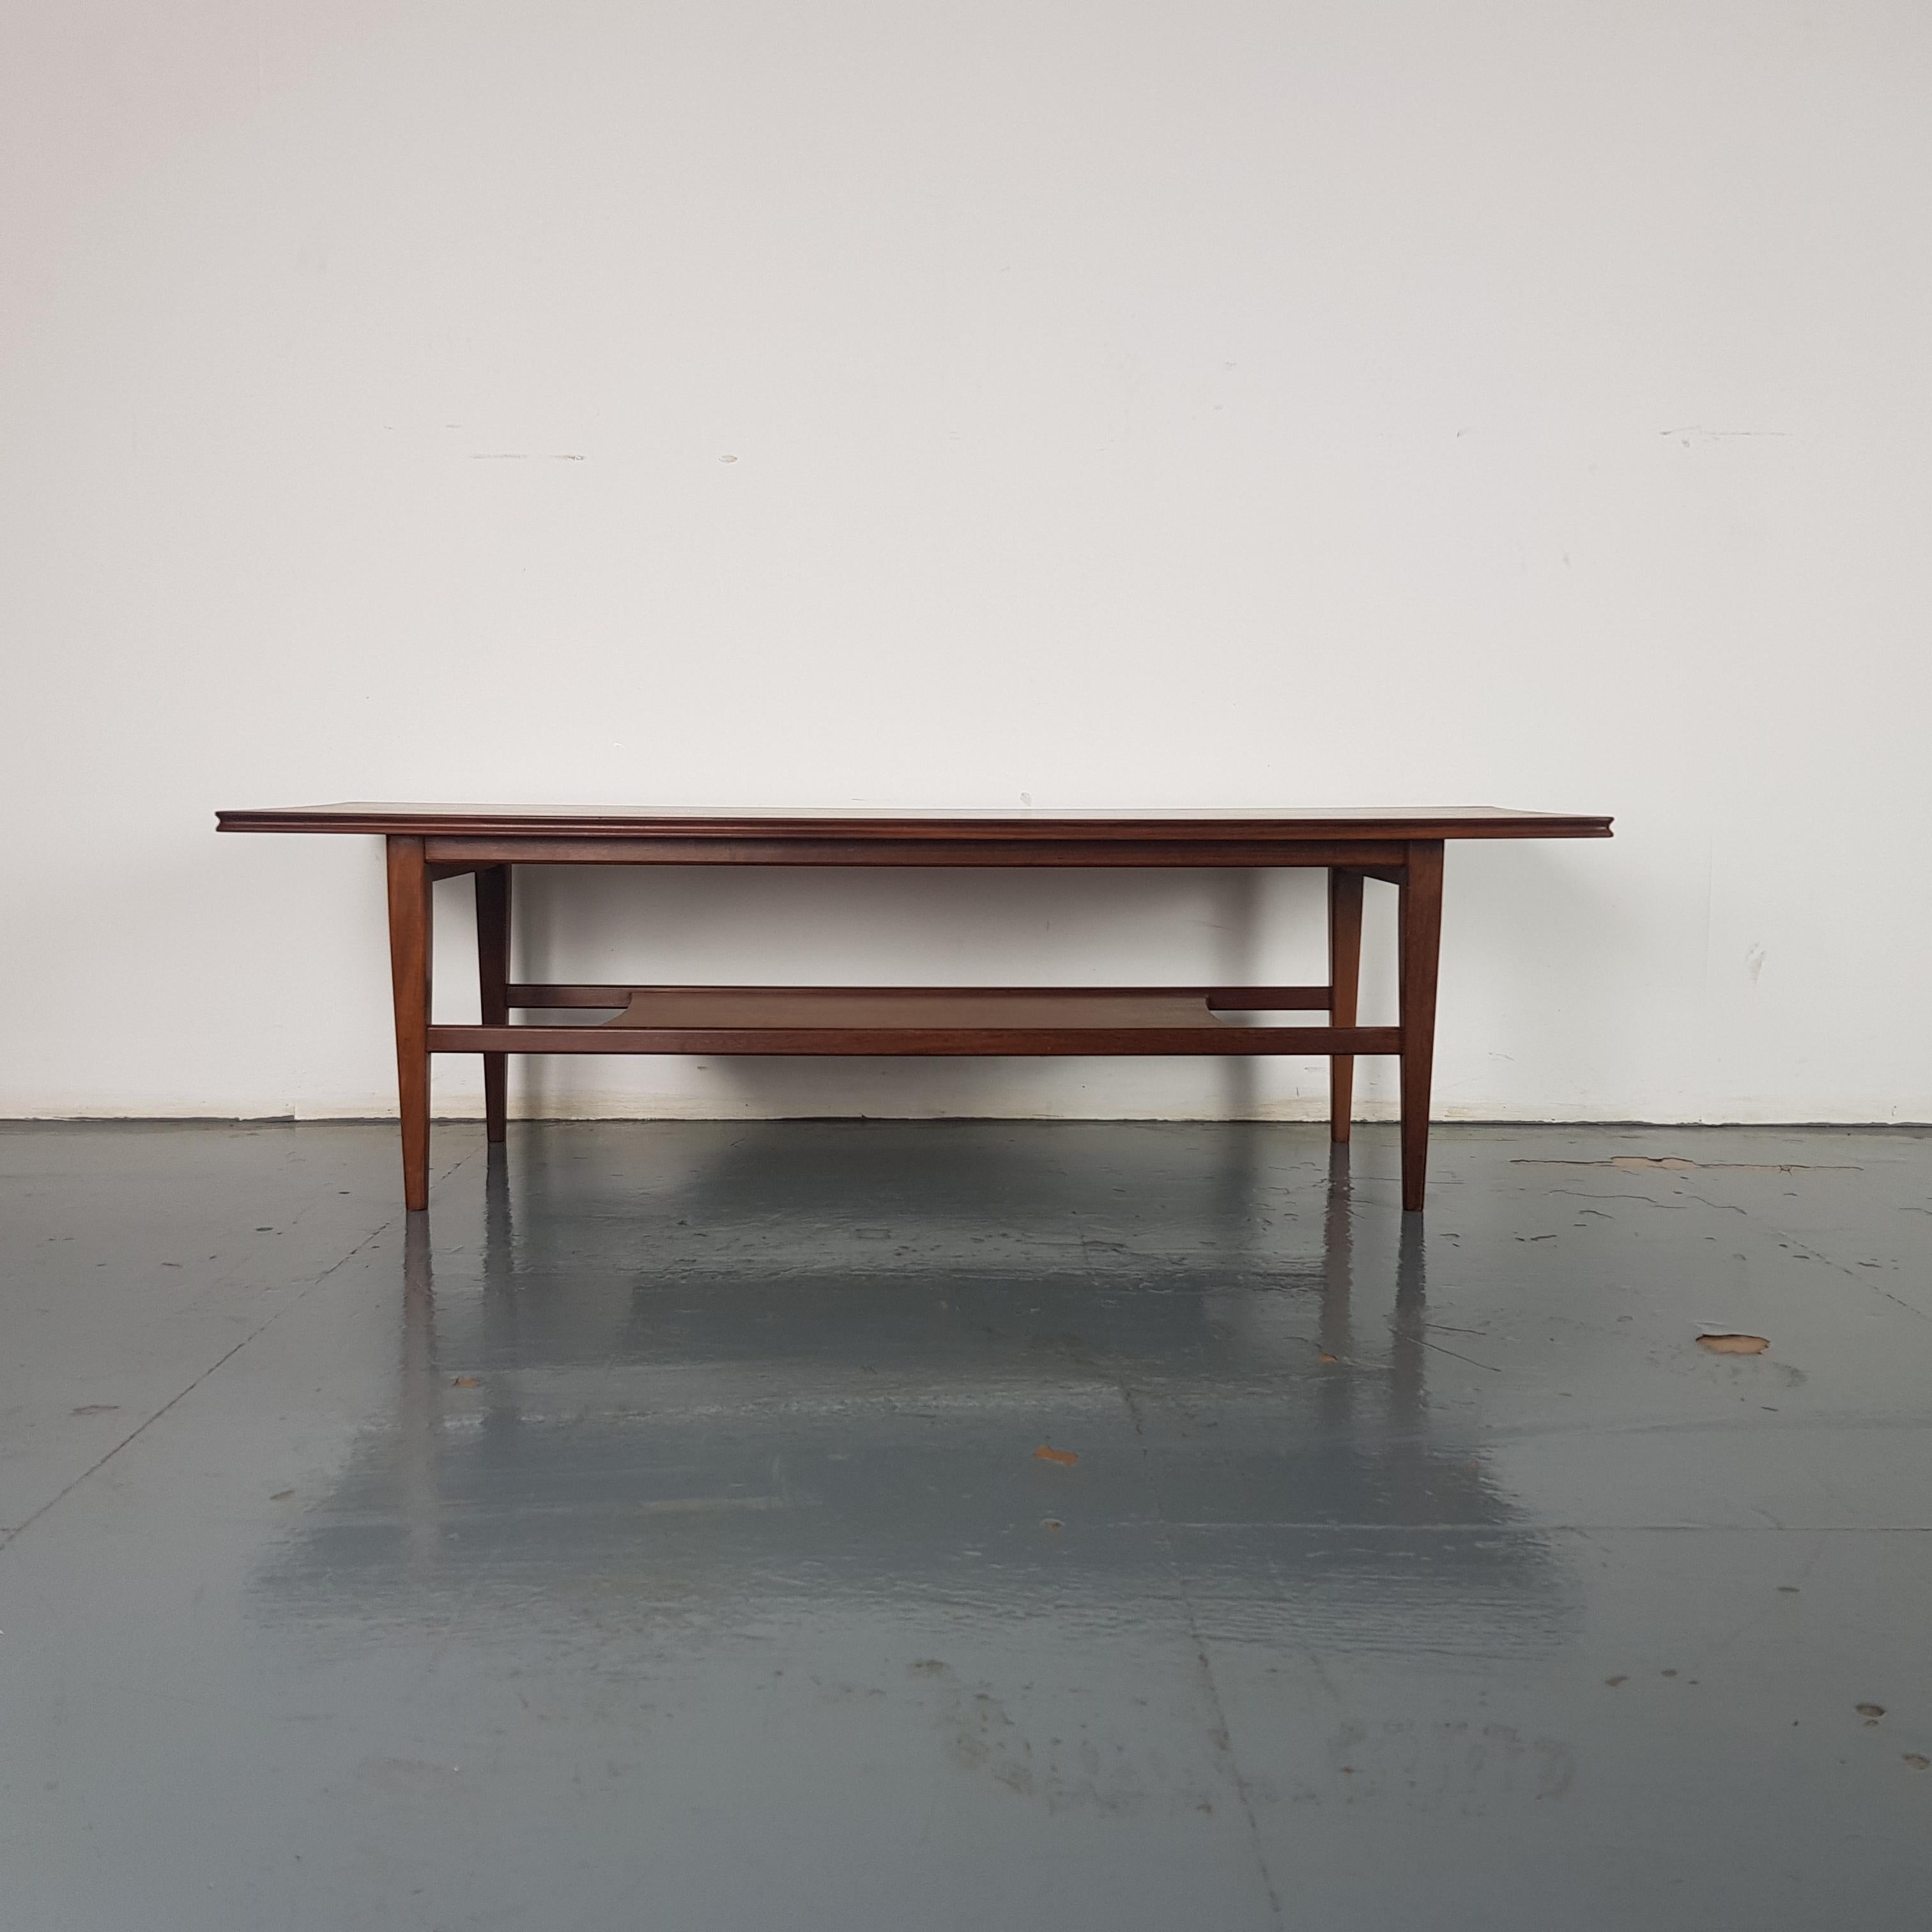 Classic midcentury two-tier coffee table by Richard Hornby for Heal's.
In good vintage condition, with some wear commensurate with age and use, but nothing specific to mention.

Approximate dimensions:

Width 105cm

Depth 43cm

Height